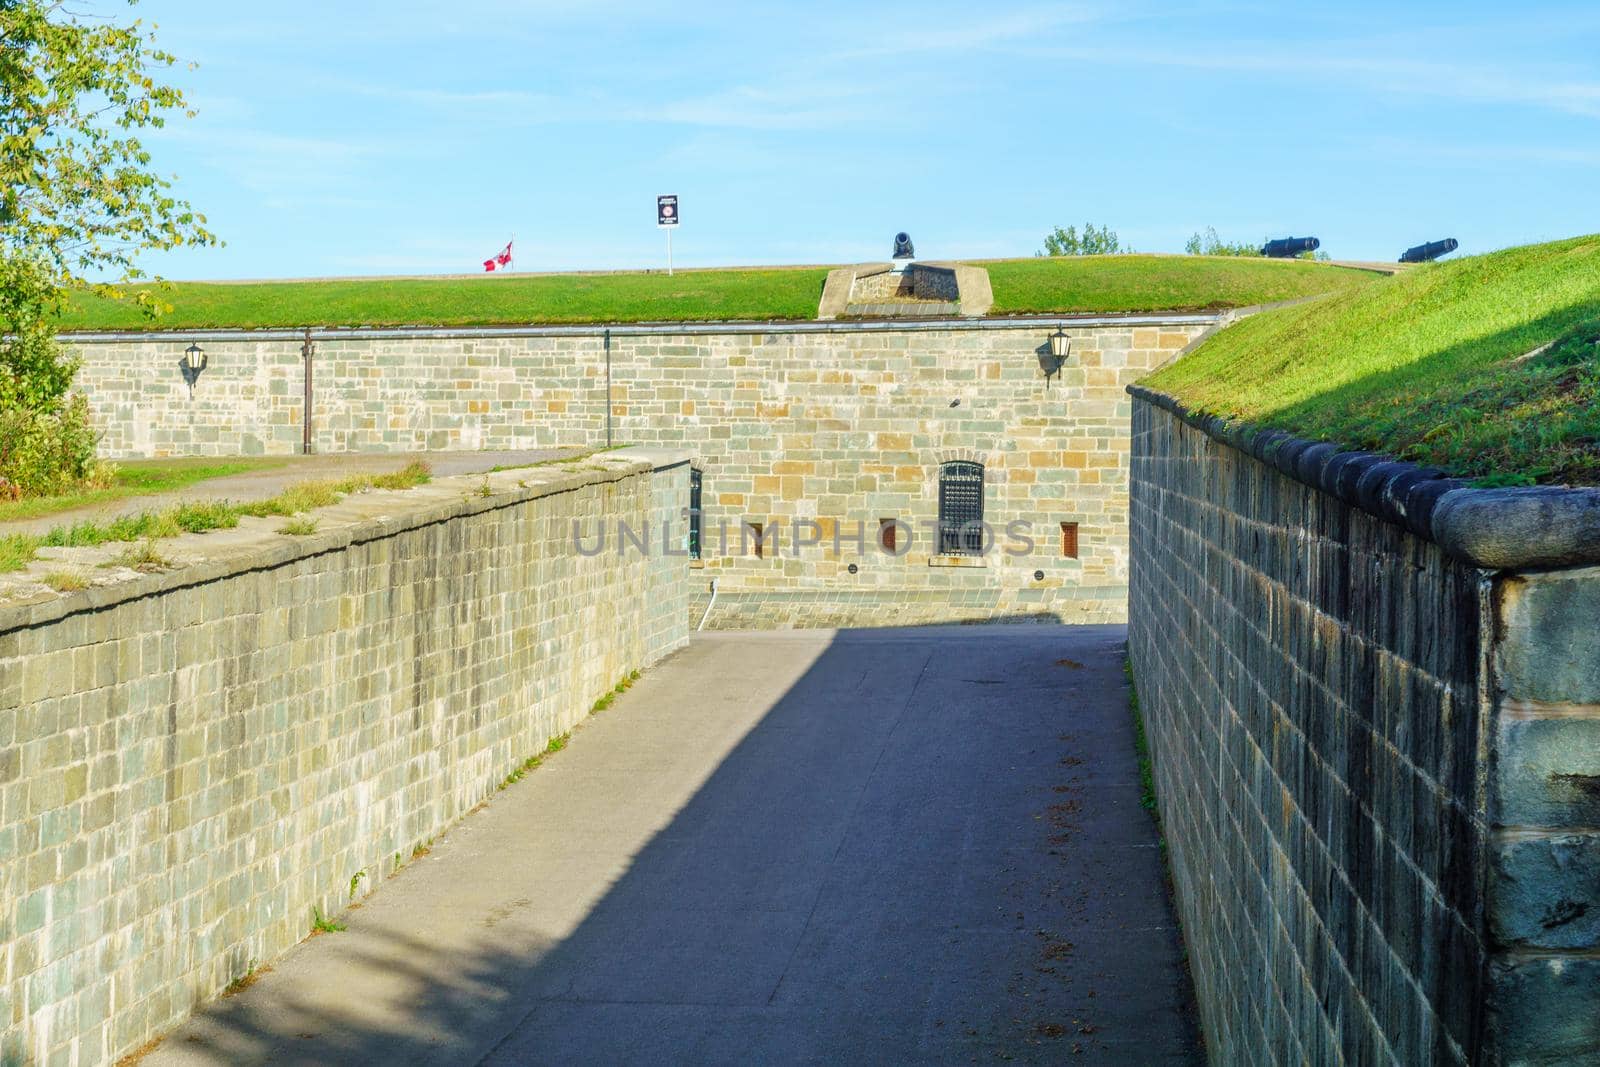 Citadel fortifications, Quebec City by RnDmS